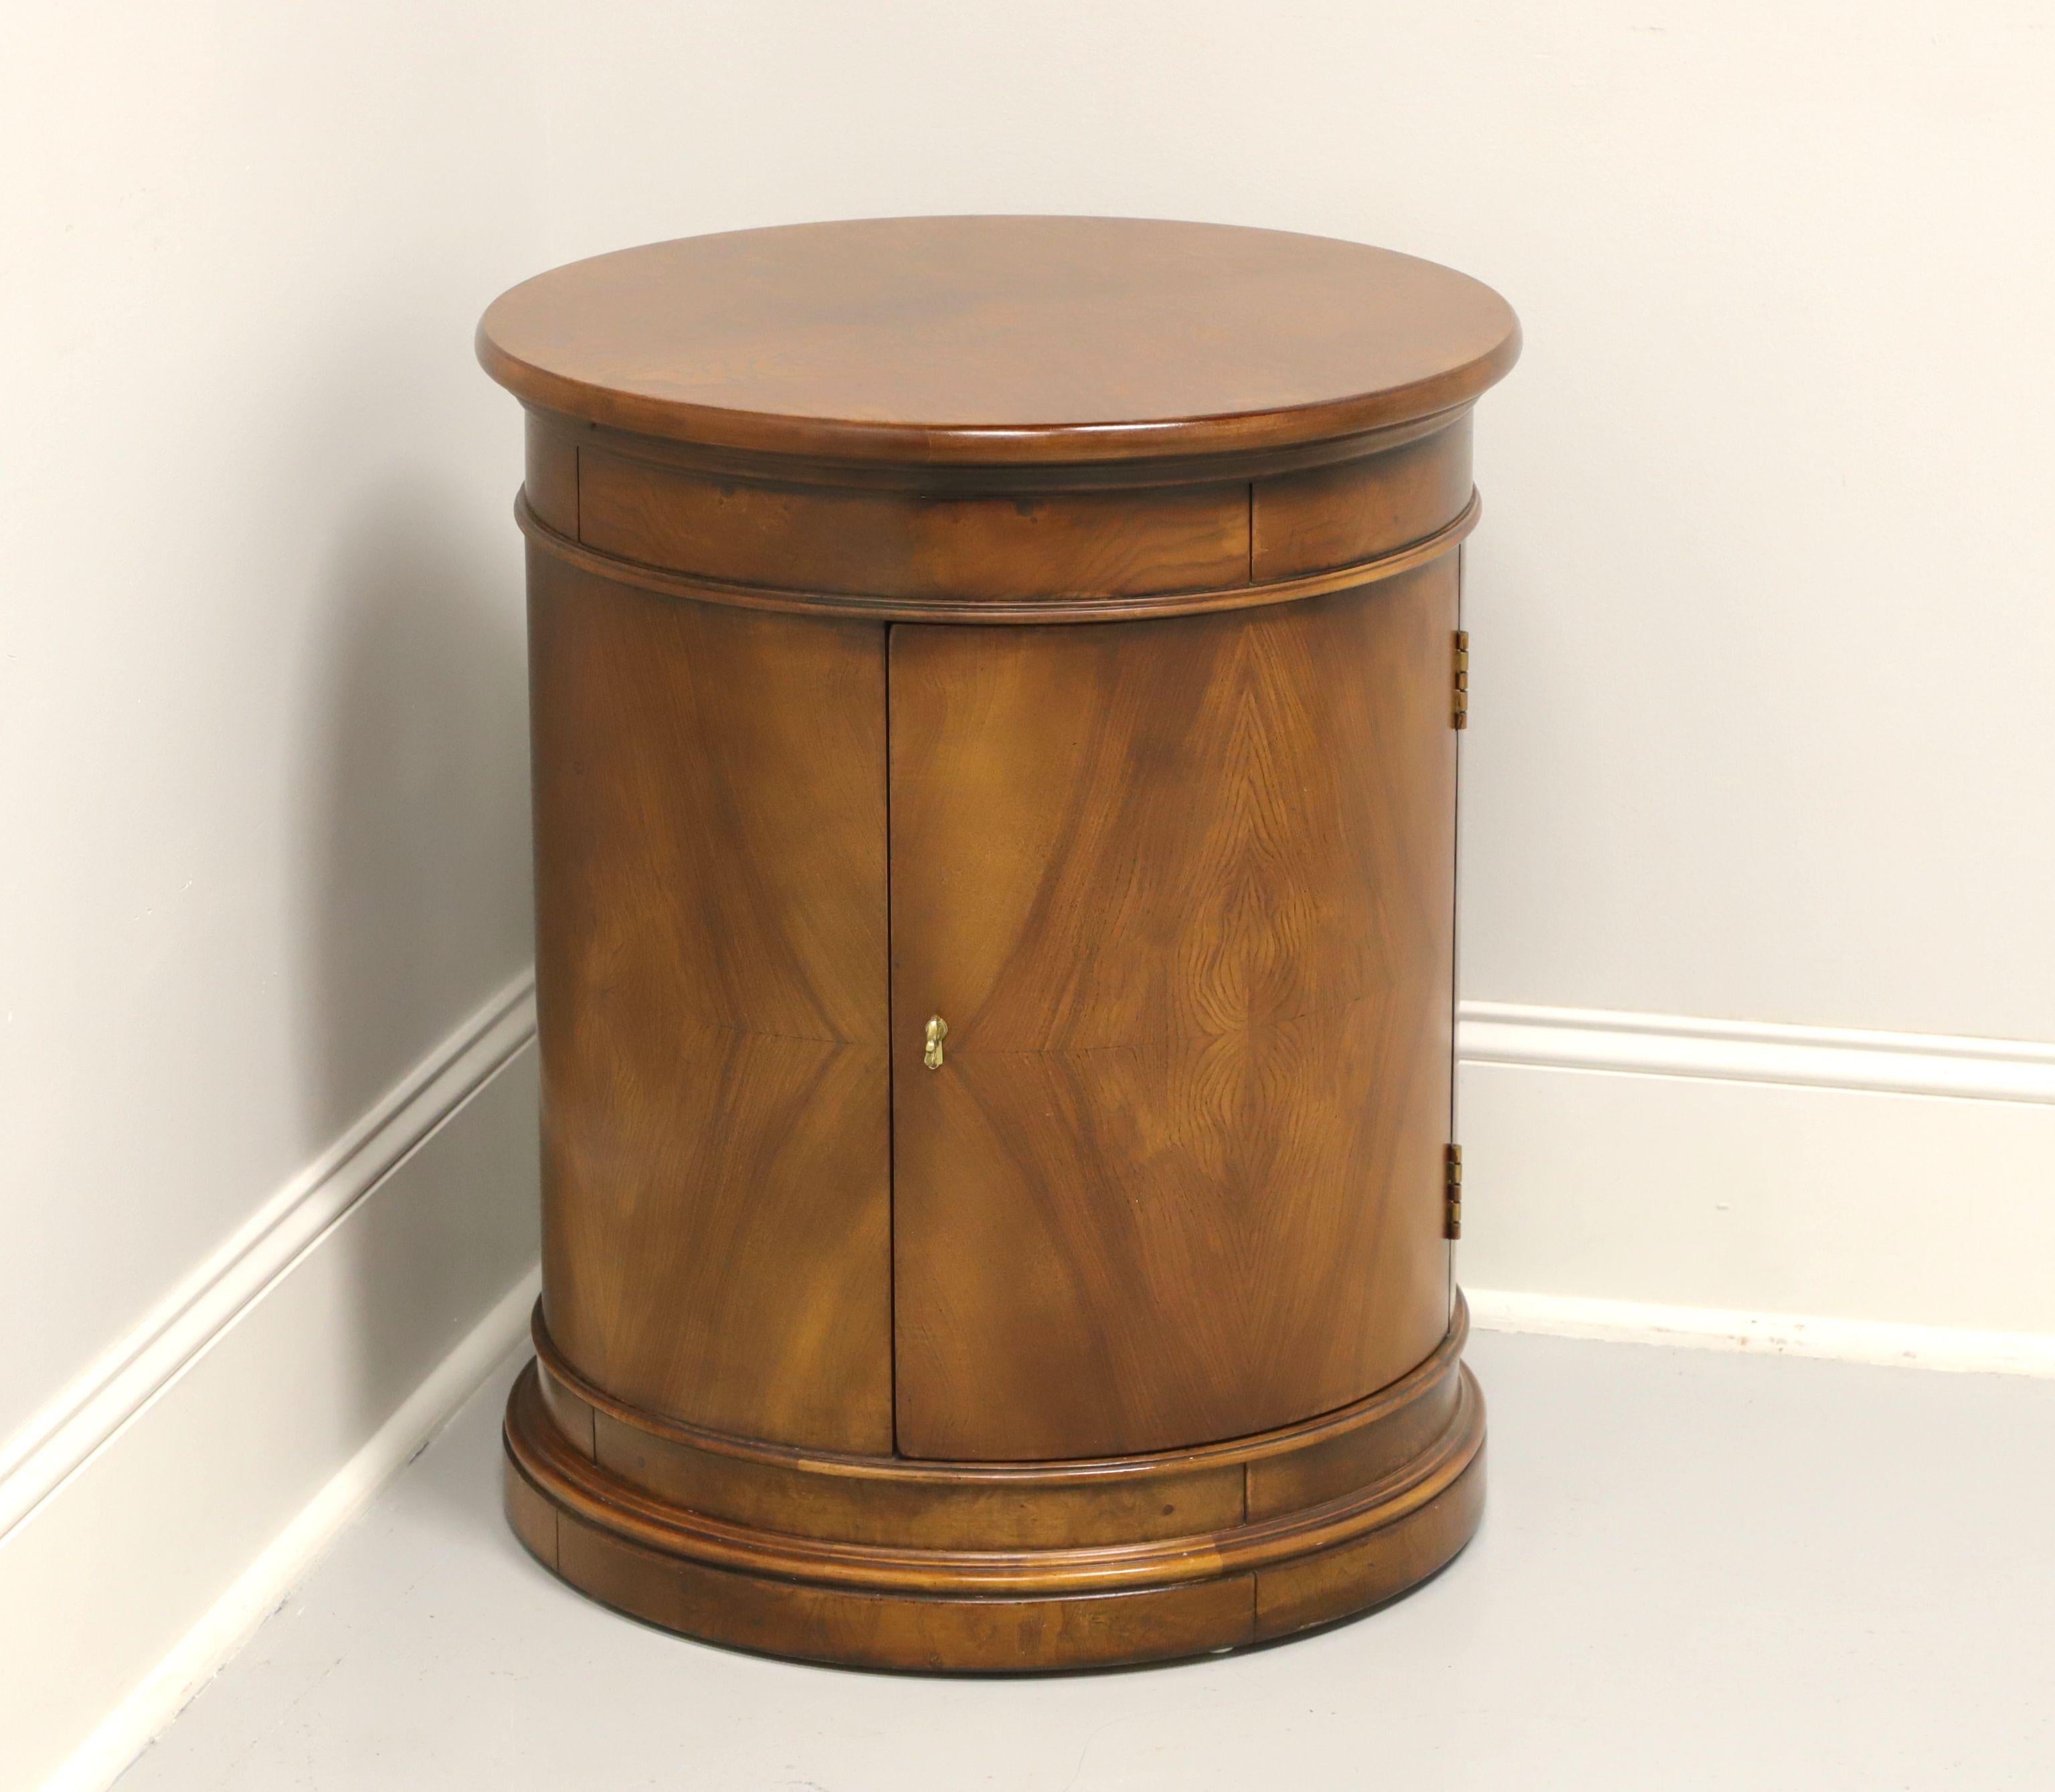 A Transitional style round cabinet accent table, unbranded, similar quality to Drexel or Henredon. Burl elm with brass hardware. Features burl top, bookmatched door front and ample storage within cabinet with one adjustable wood shelf. Made in the